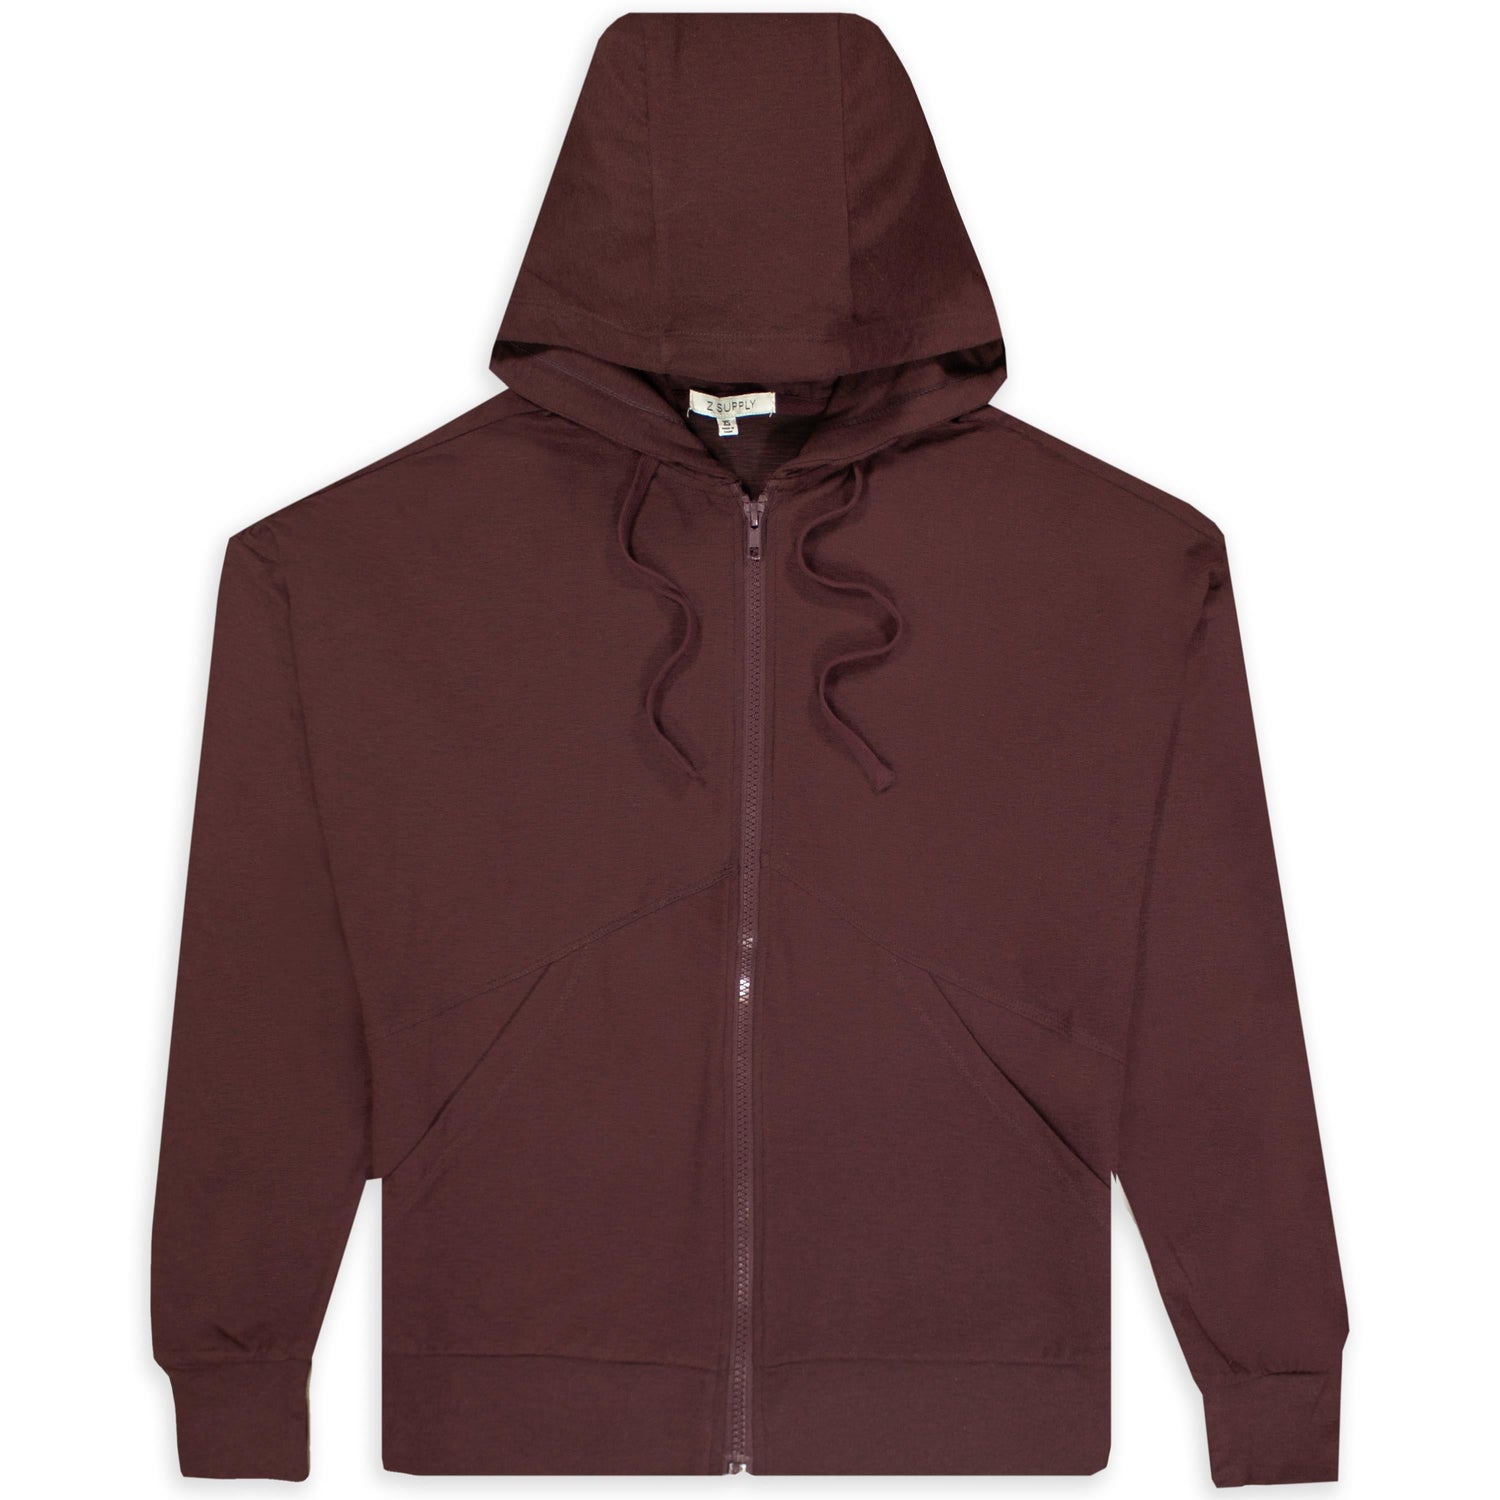 Carry On Zip Front Jacket